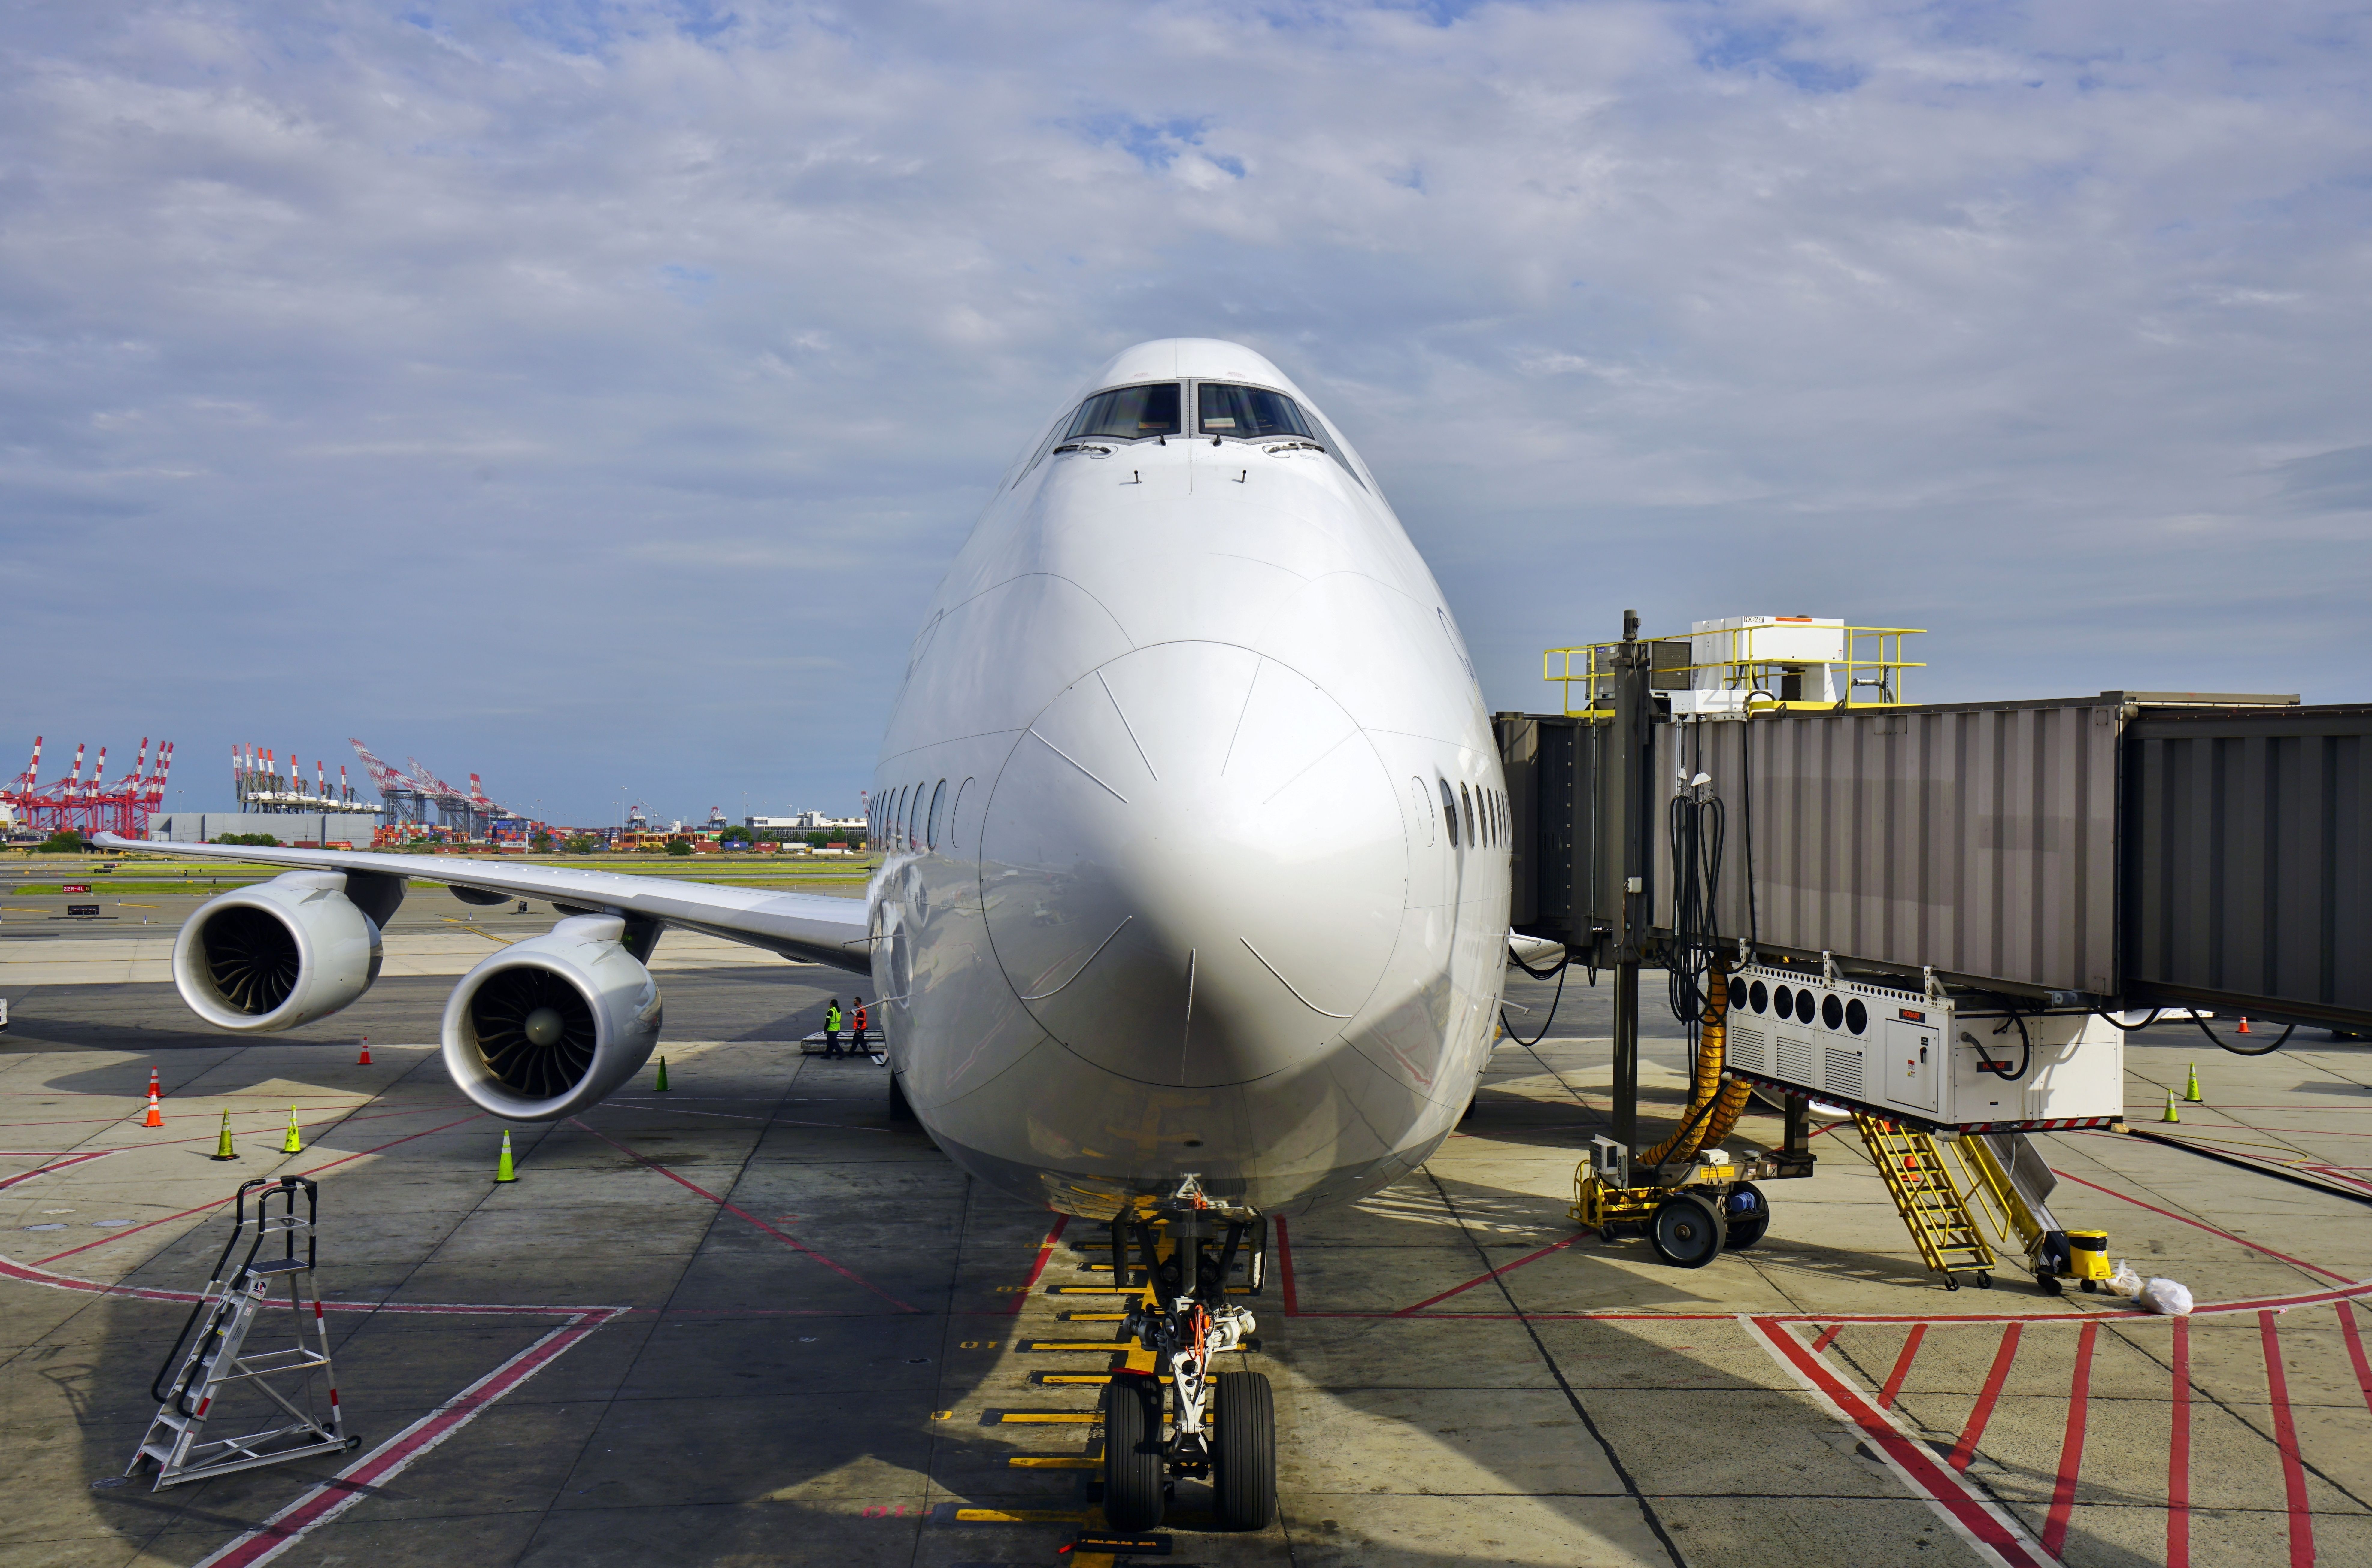 A head-on view of a Lufthansa Boeing 747-8 parked at an airport gate.